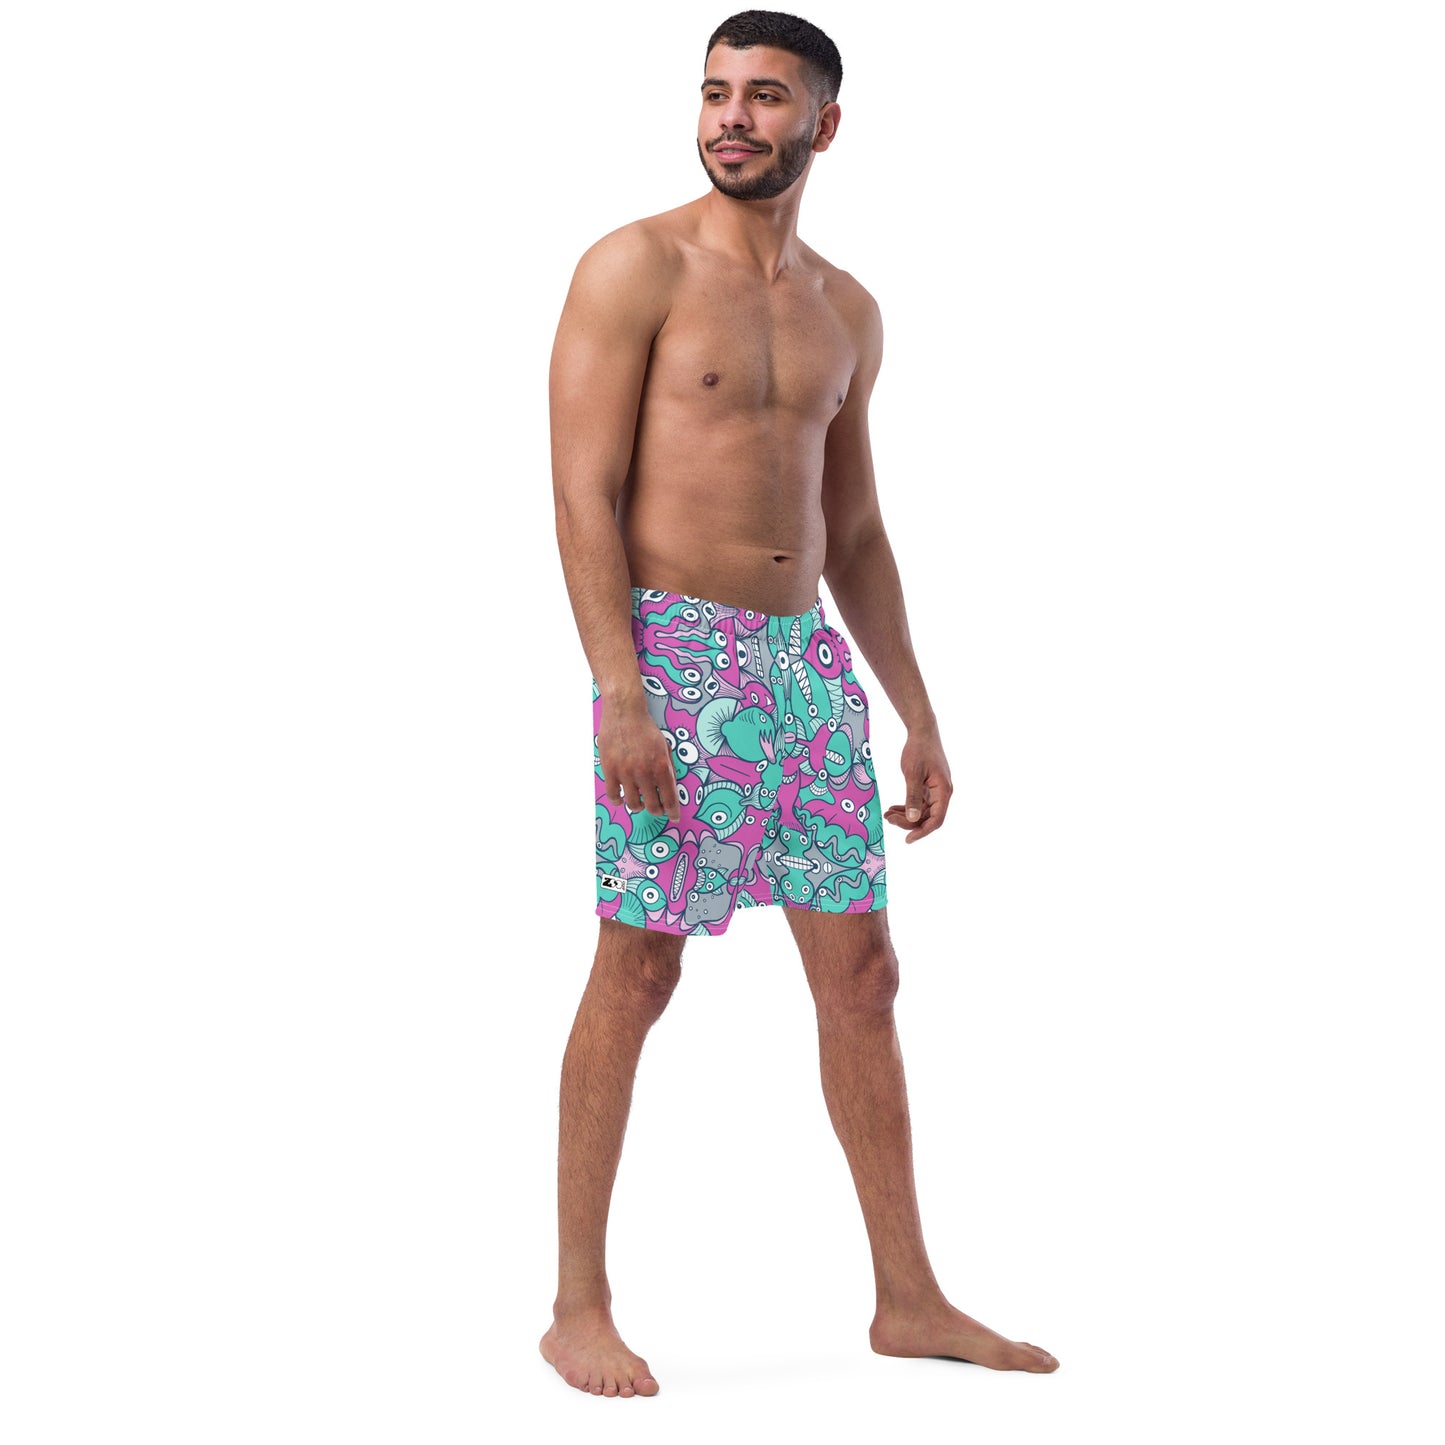 Smiling man wearing Men's swim trunks All-over printed with Sea creatures from an alien world